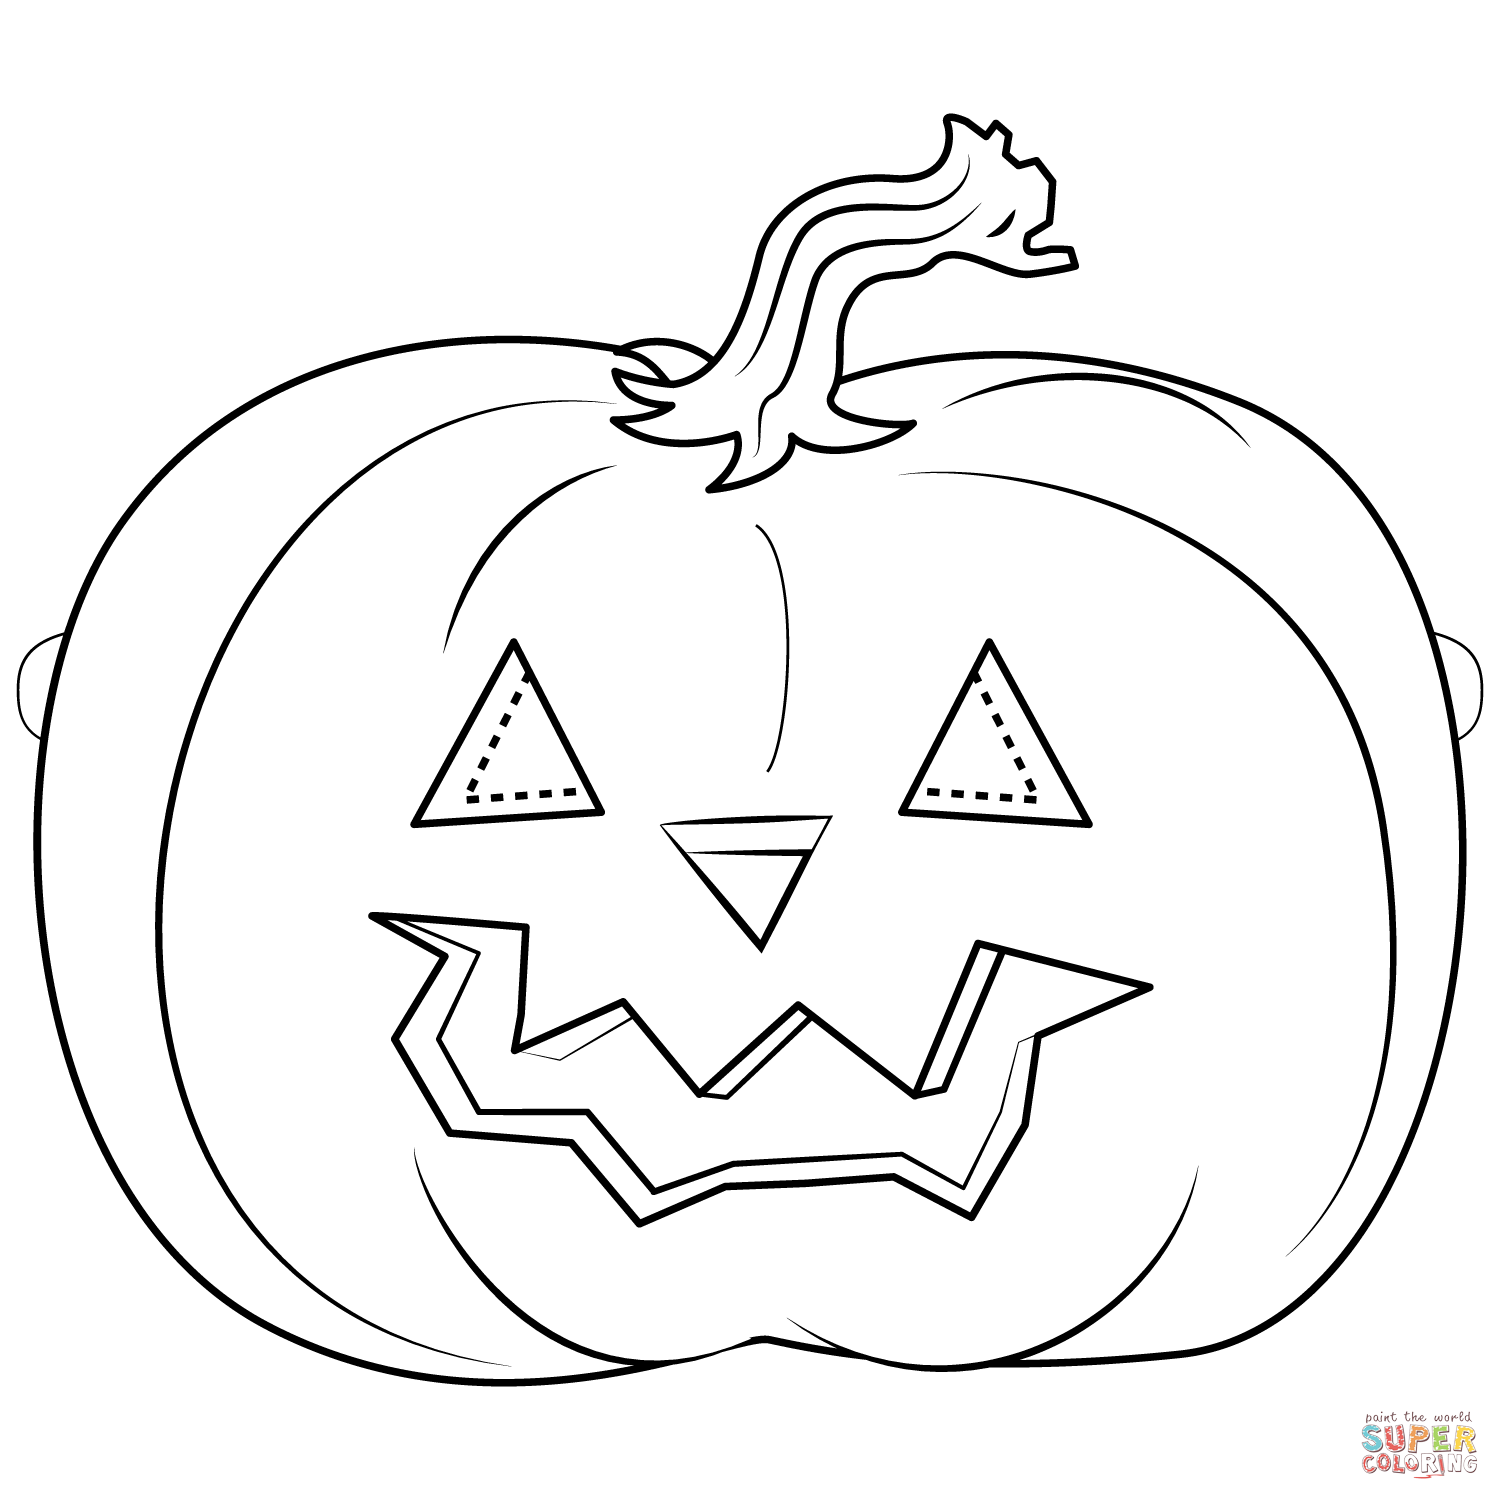 Pumpkin Mask coloring page | Free Printable Coloring Pages